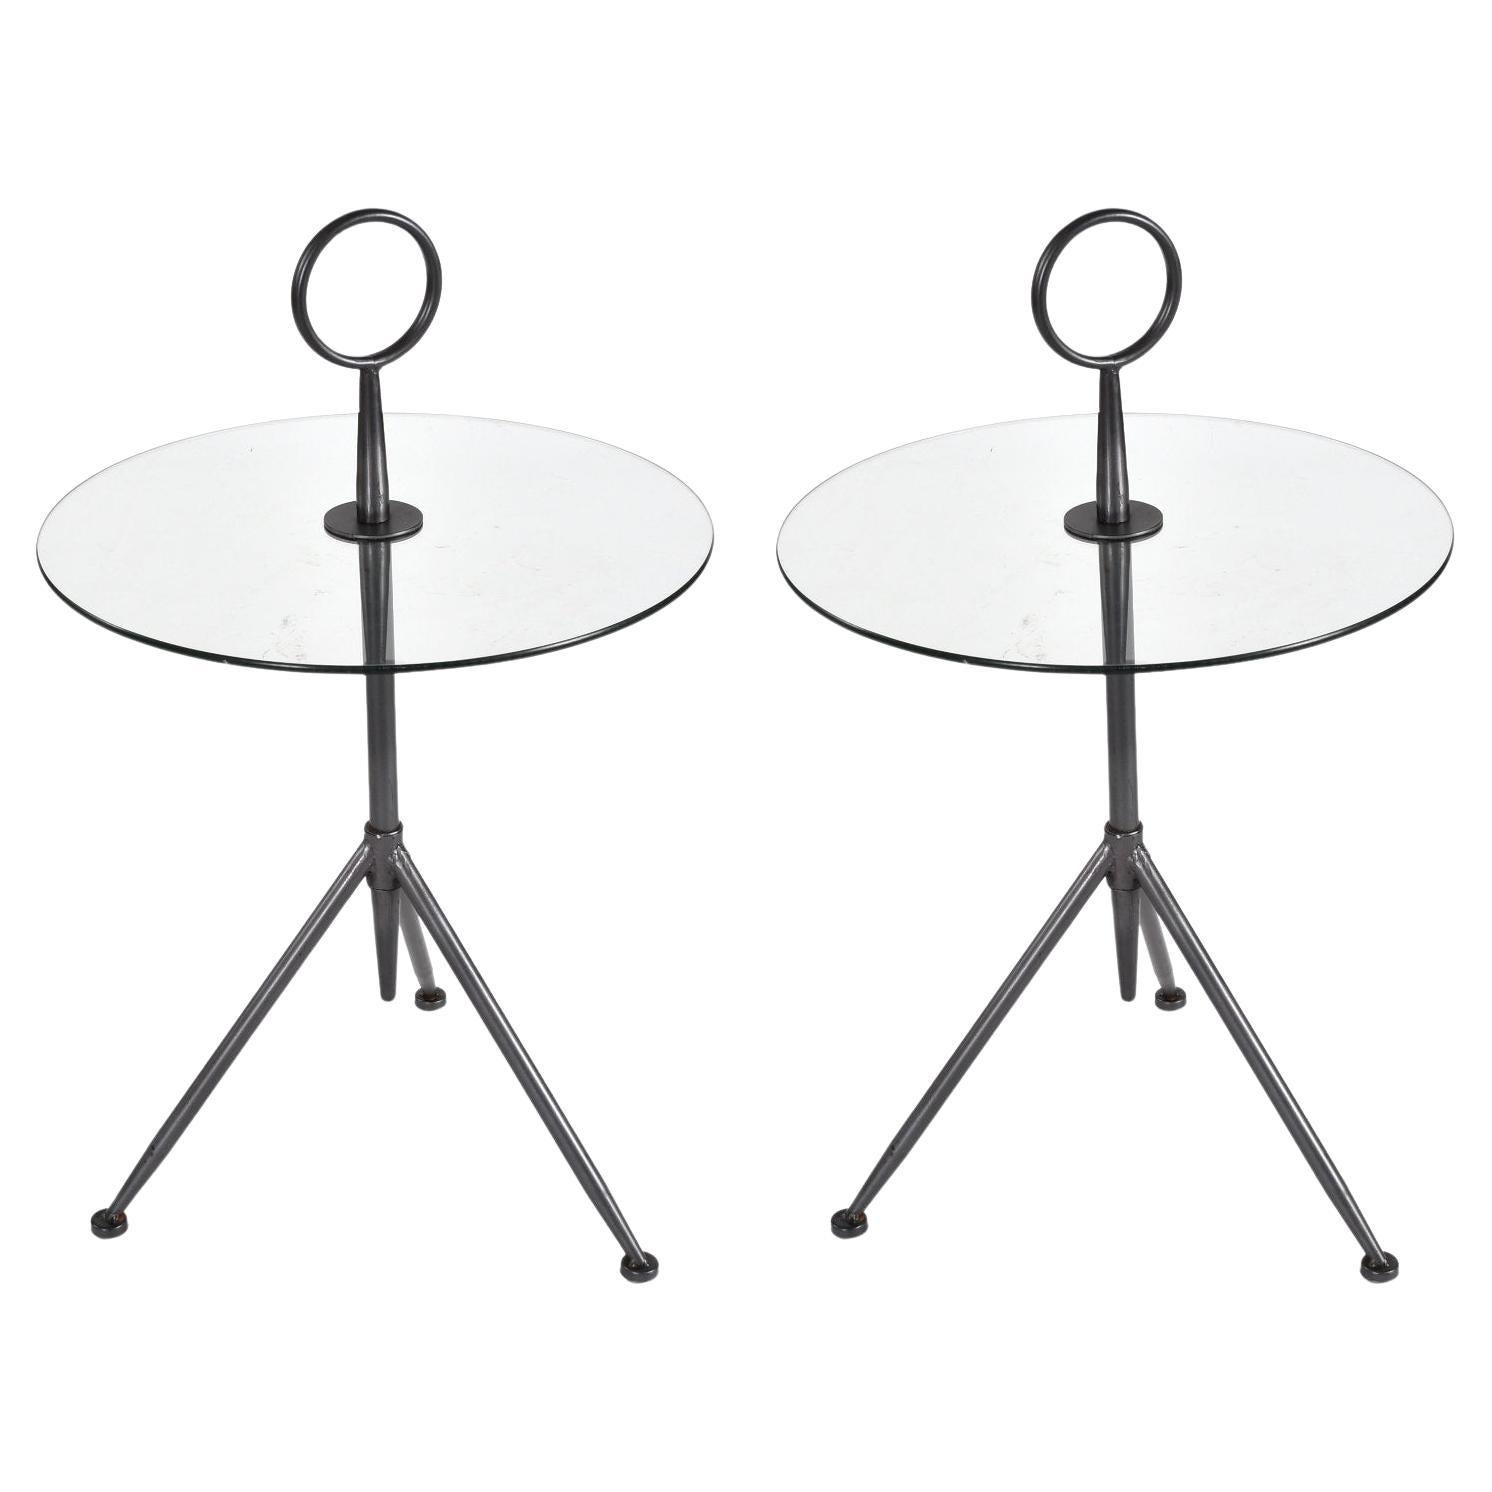 Pair of Italian Modern Round Glass Gueridon Side Tables with Tripod Steel Bases For Sale